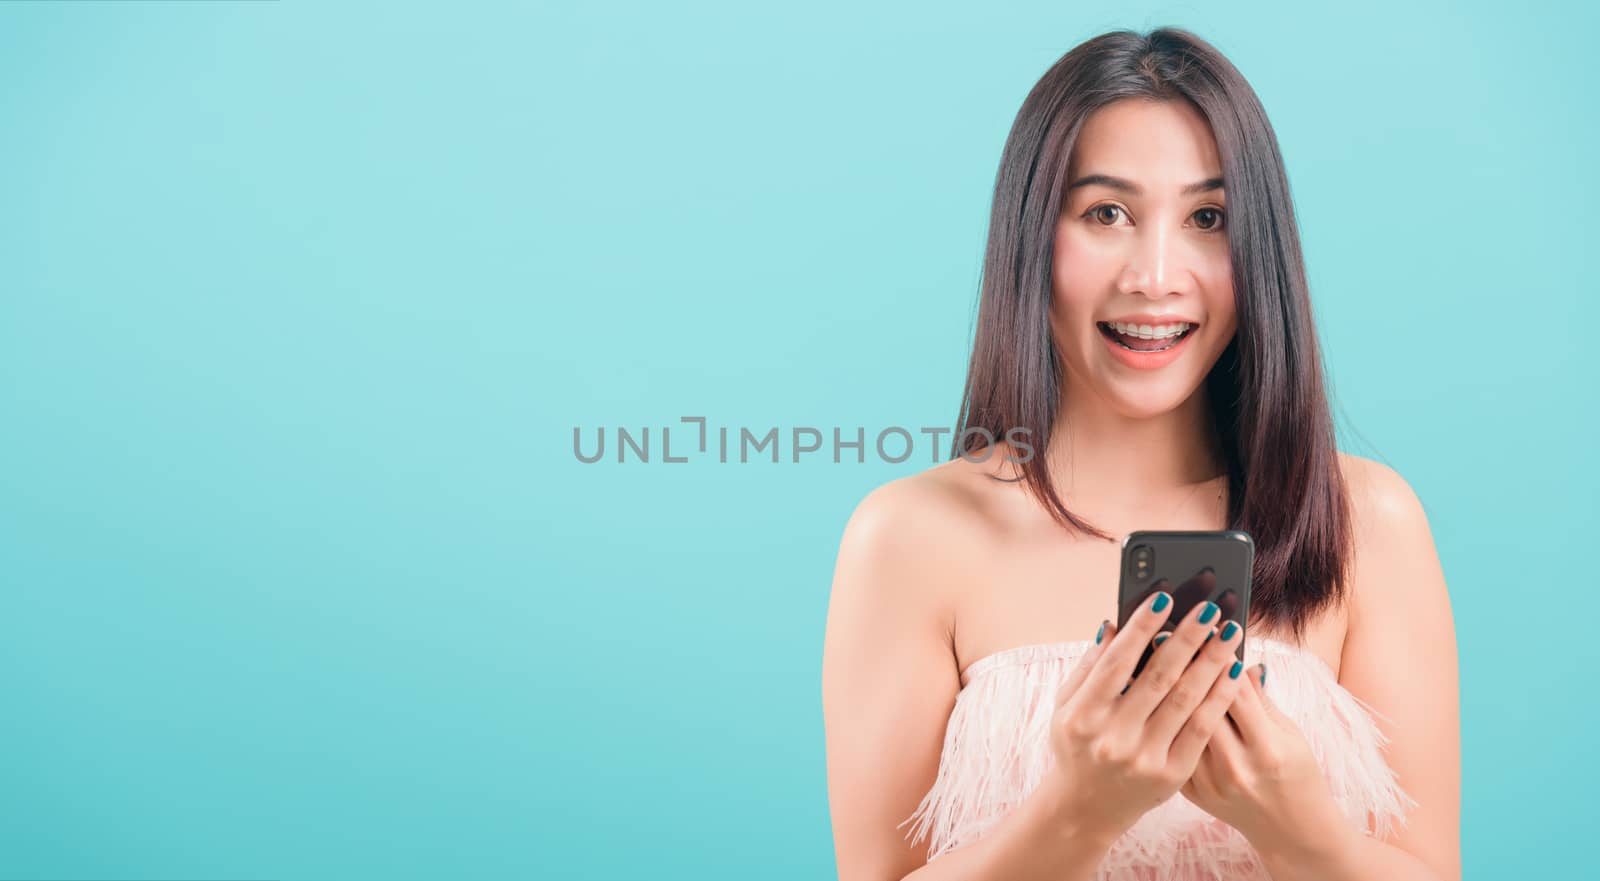 Asian happy portrait beautiful young woman standing smile her  holding smartphone or mobile phone and looking to camera on blue background with copy space for text